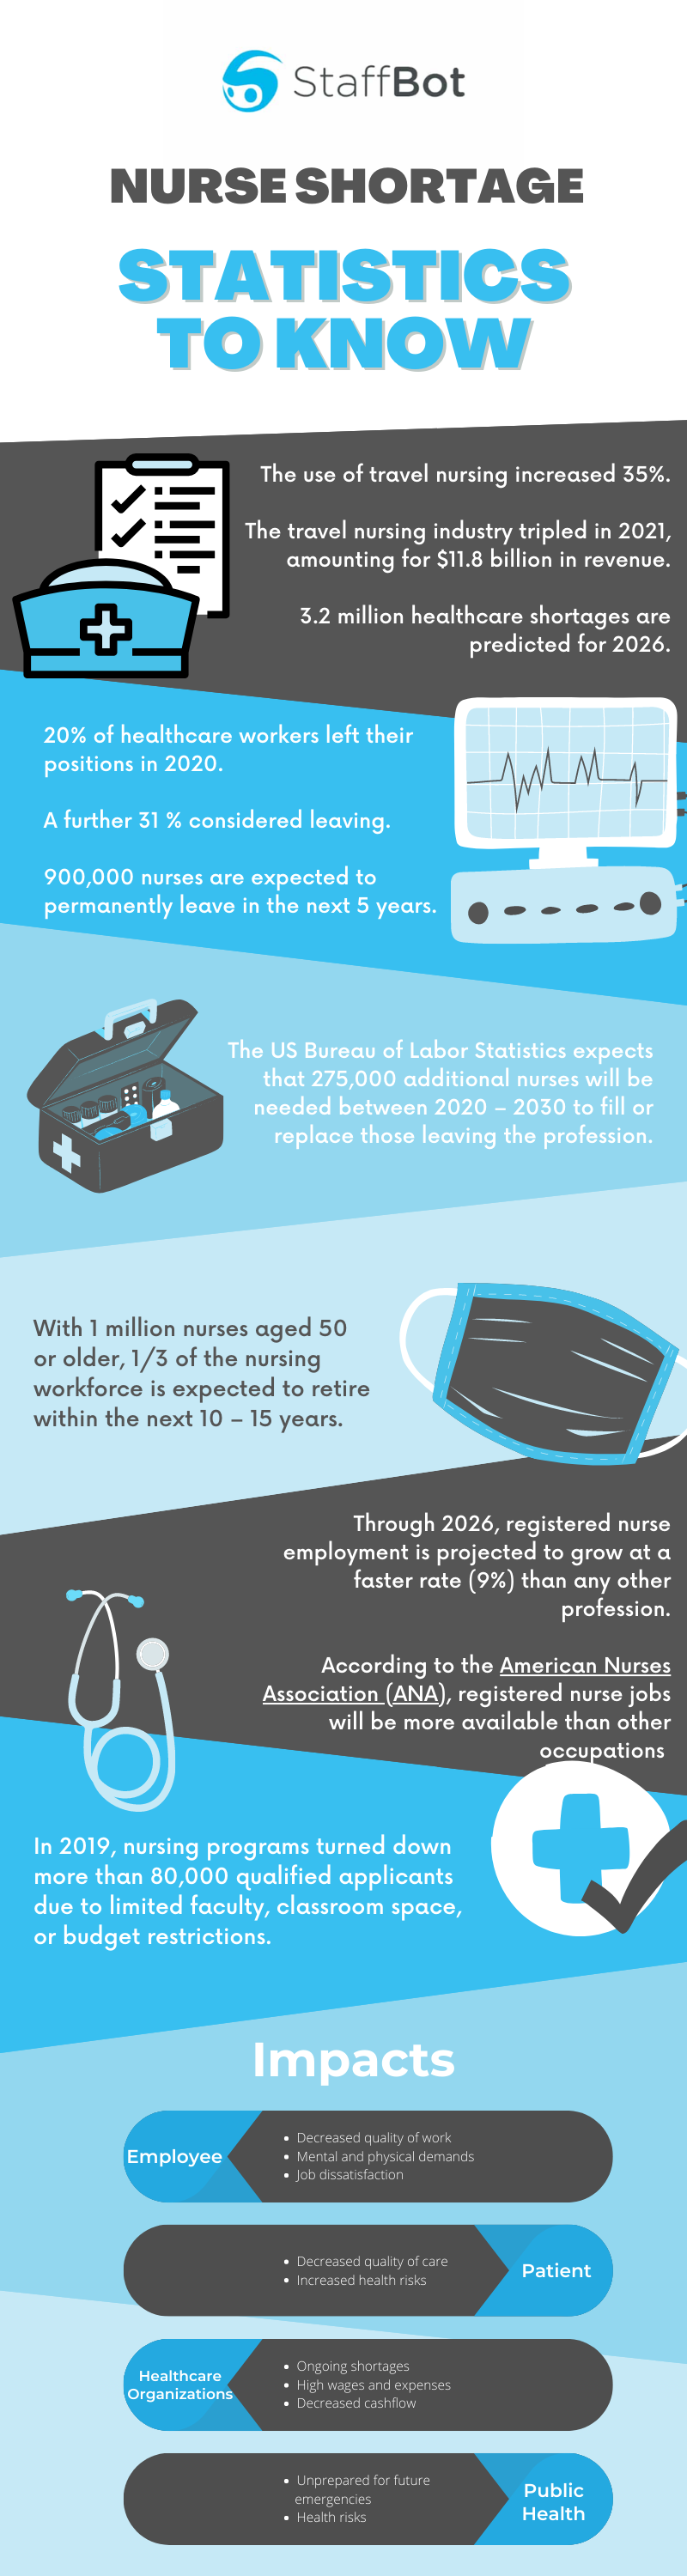 Nurse Shortage Statistics and Trends to Know Infographic